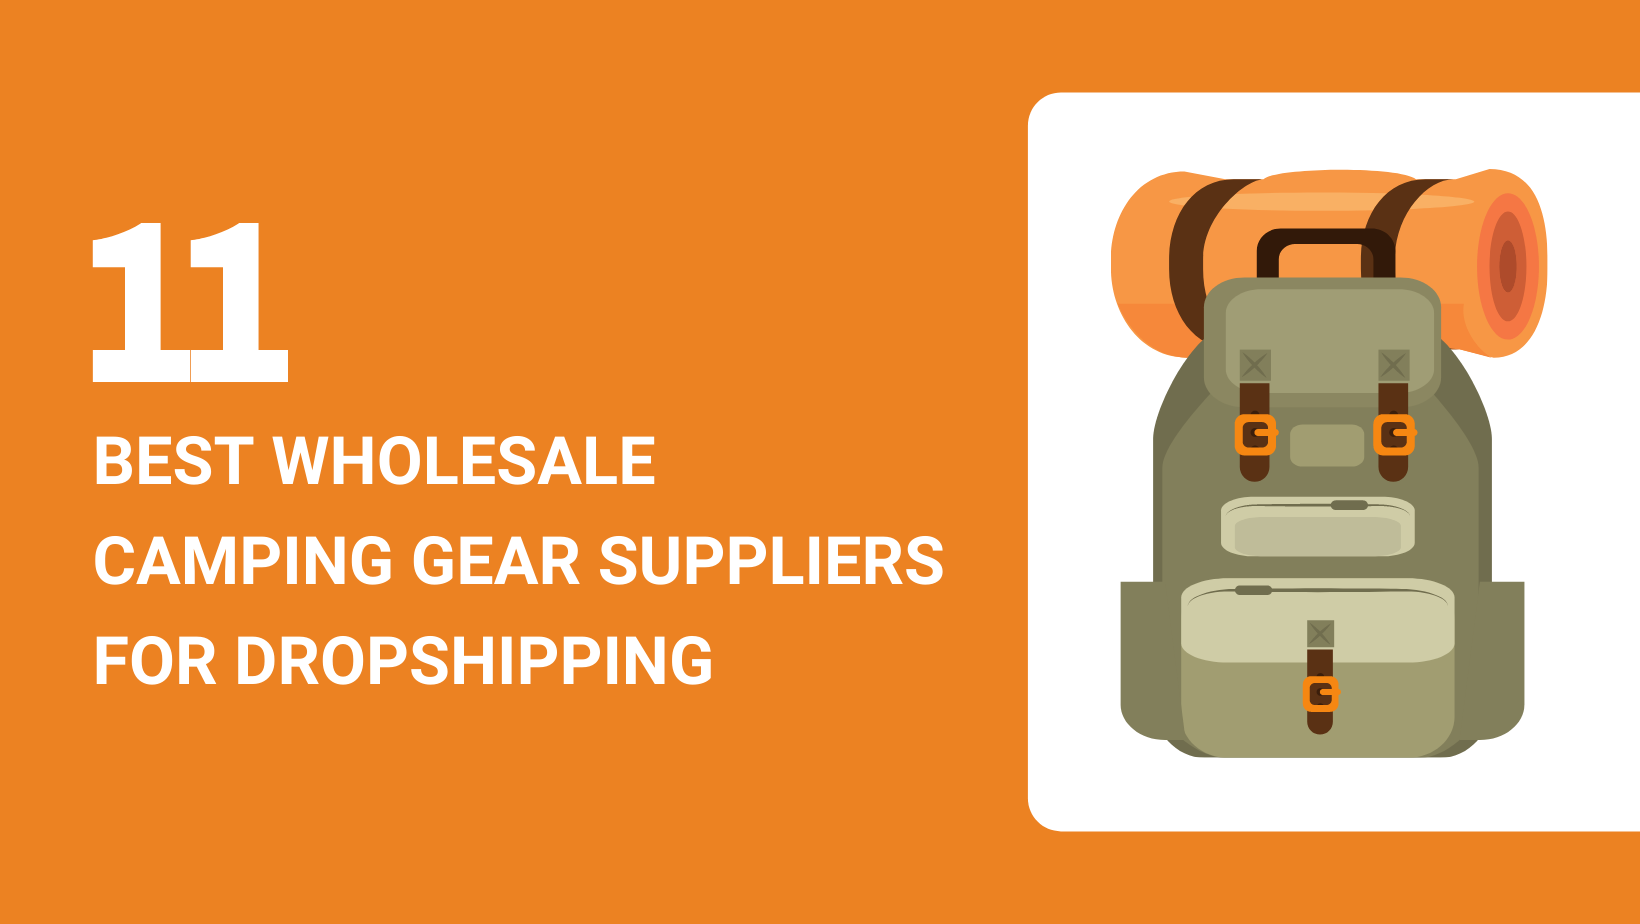 11 BEST WHOLESALE CAMPING GEAR SUPPLIERS FOR DROPSHIPPING